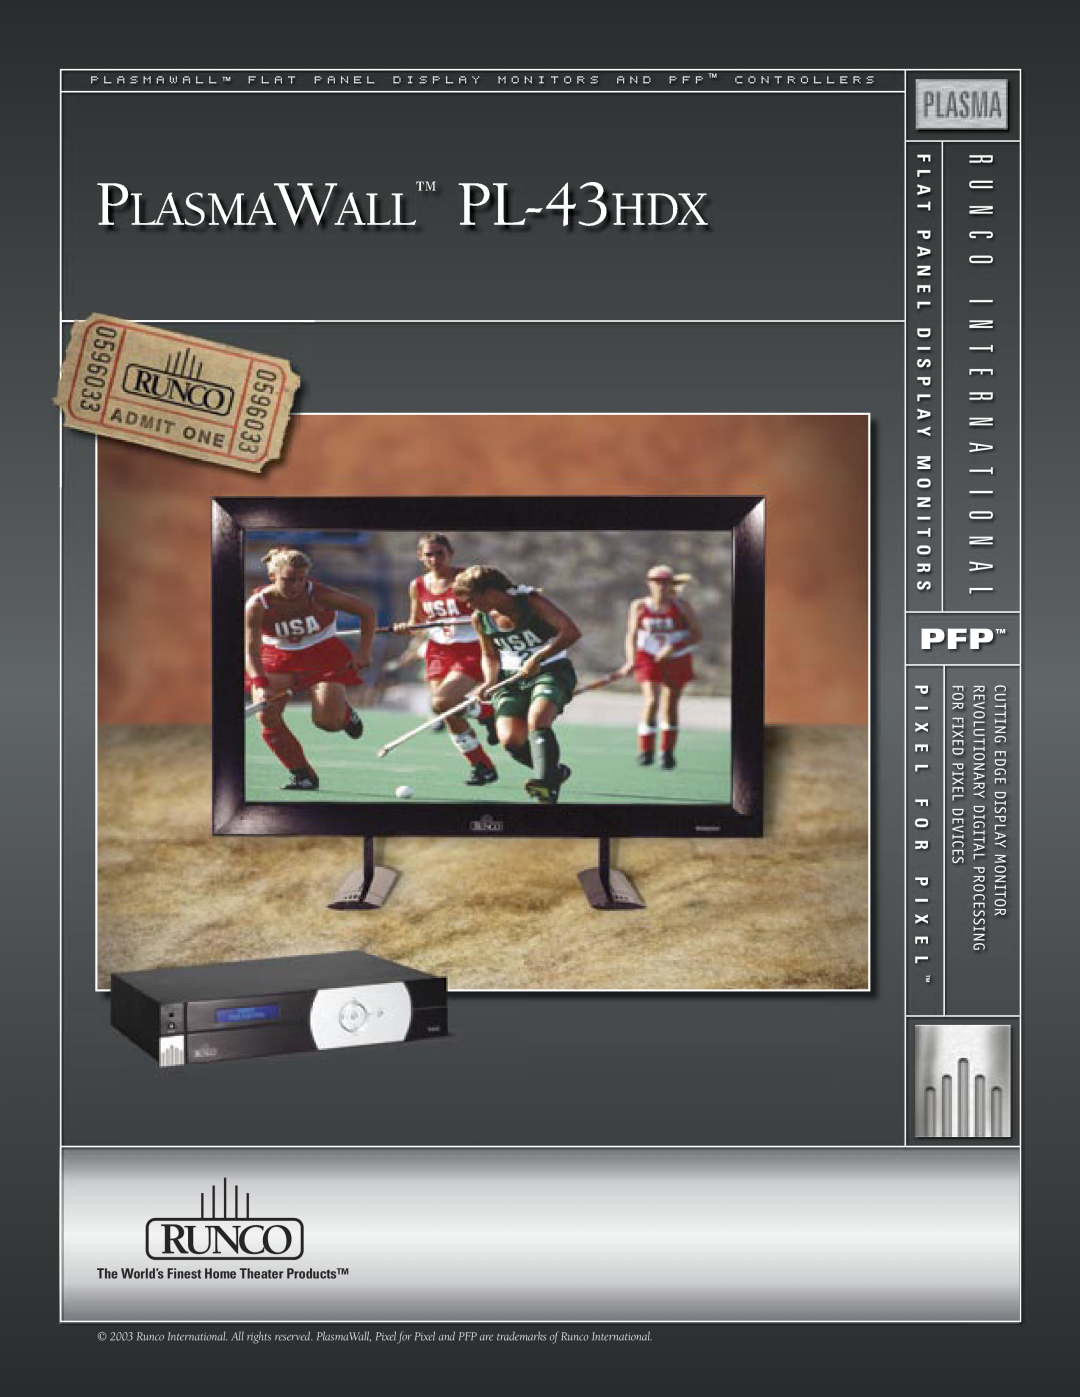 Runco manual PLASMAWALL PL-43HDX, P I X E L F O R P I X E, N E L, The World’s Finest Home Theater Products 